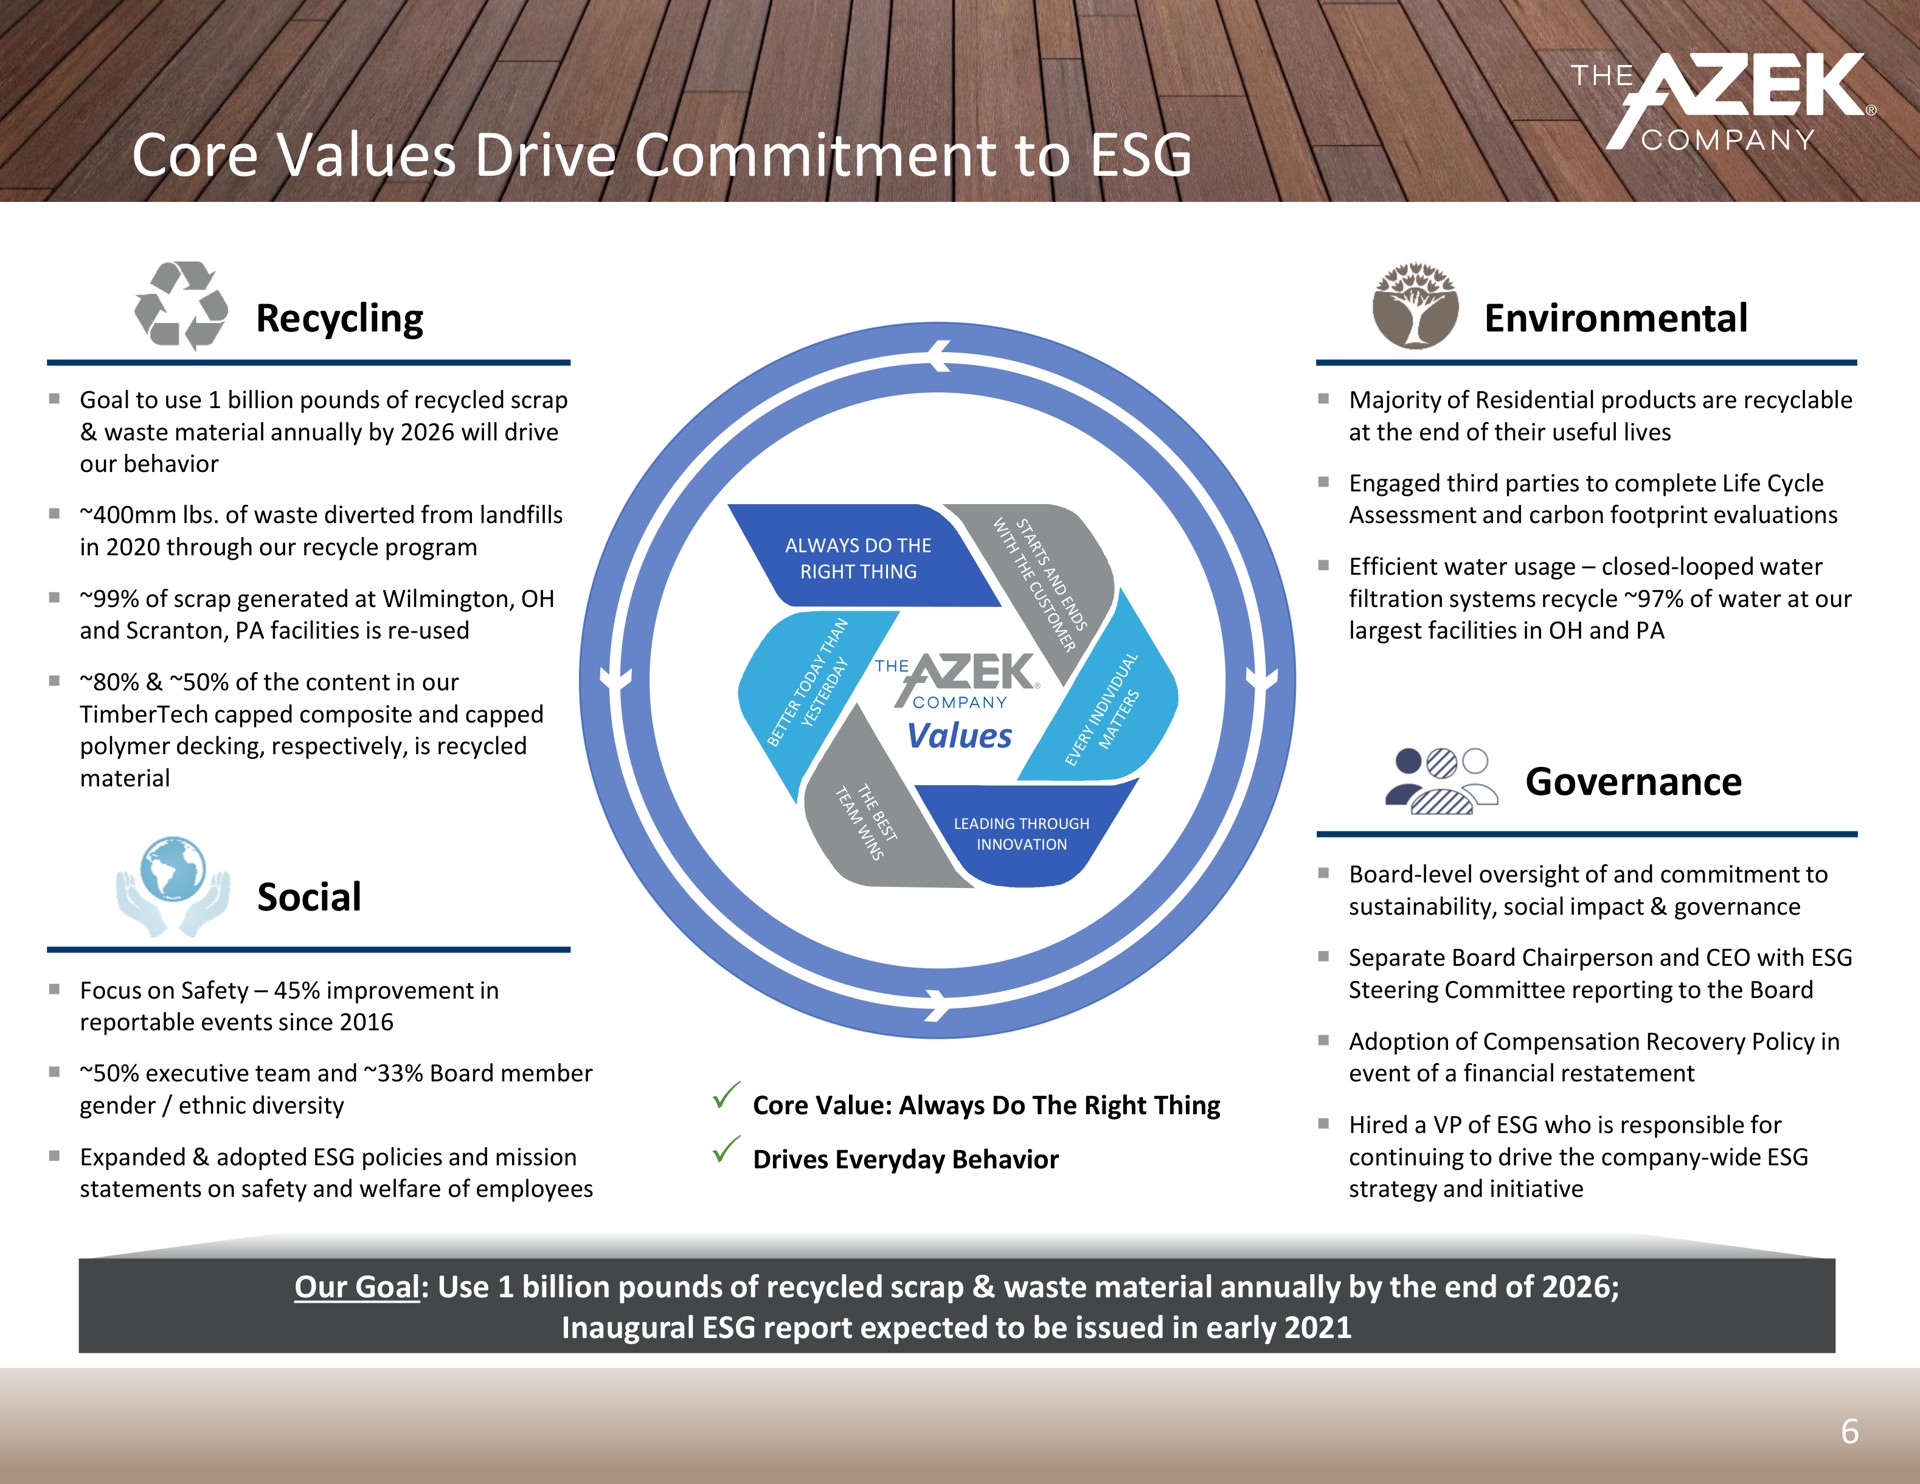 core values drive commitment to recycling social environmental governance | Azek